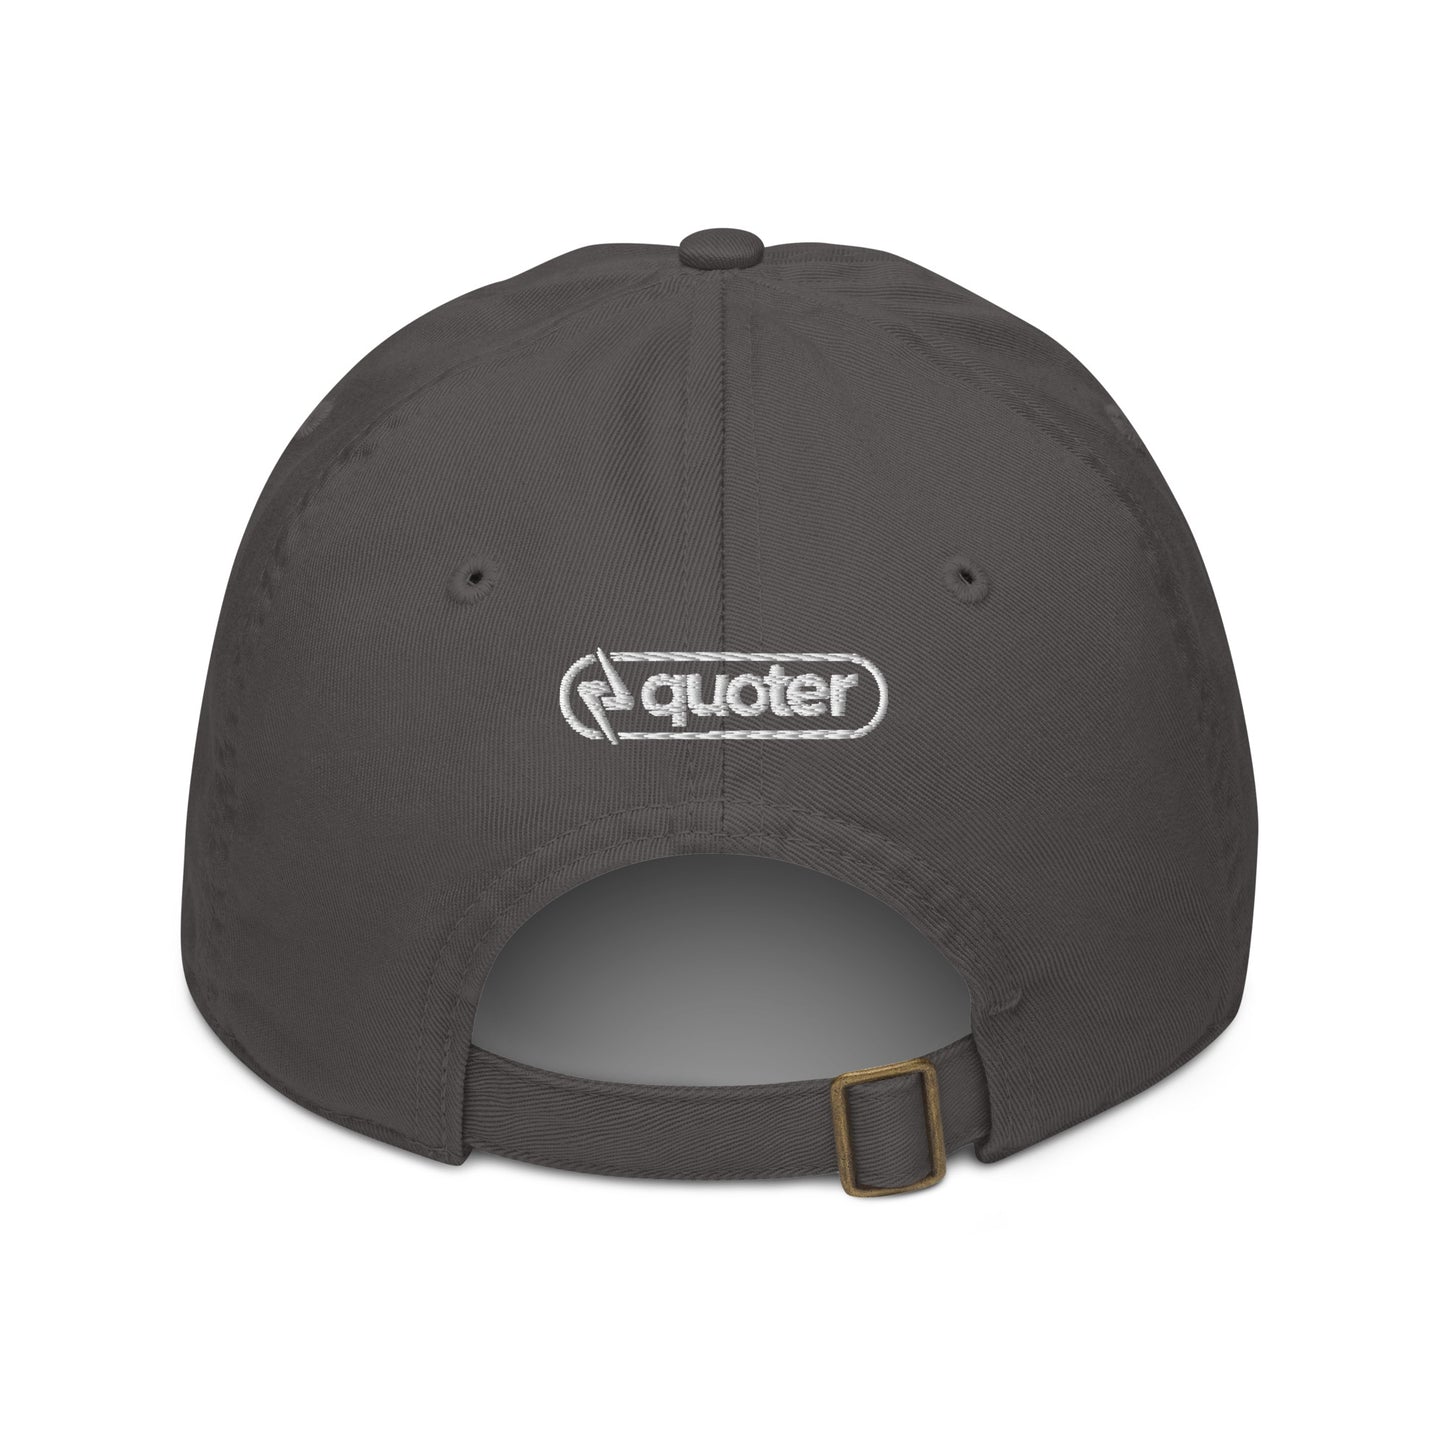 Quoter dad hat